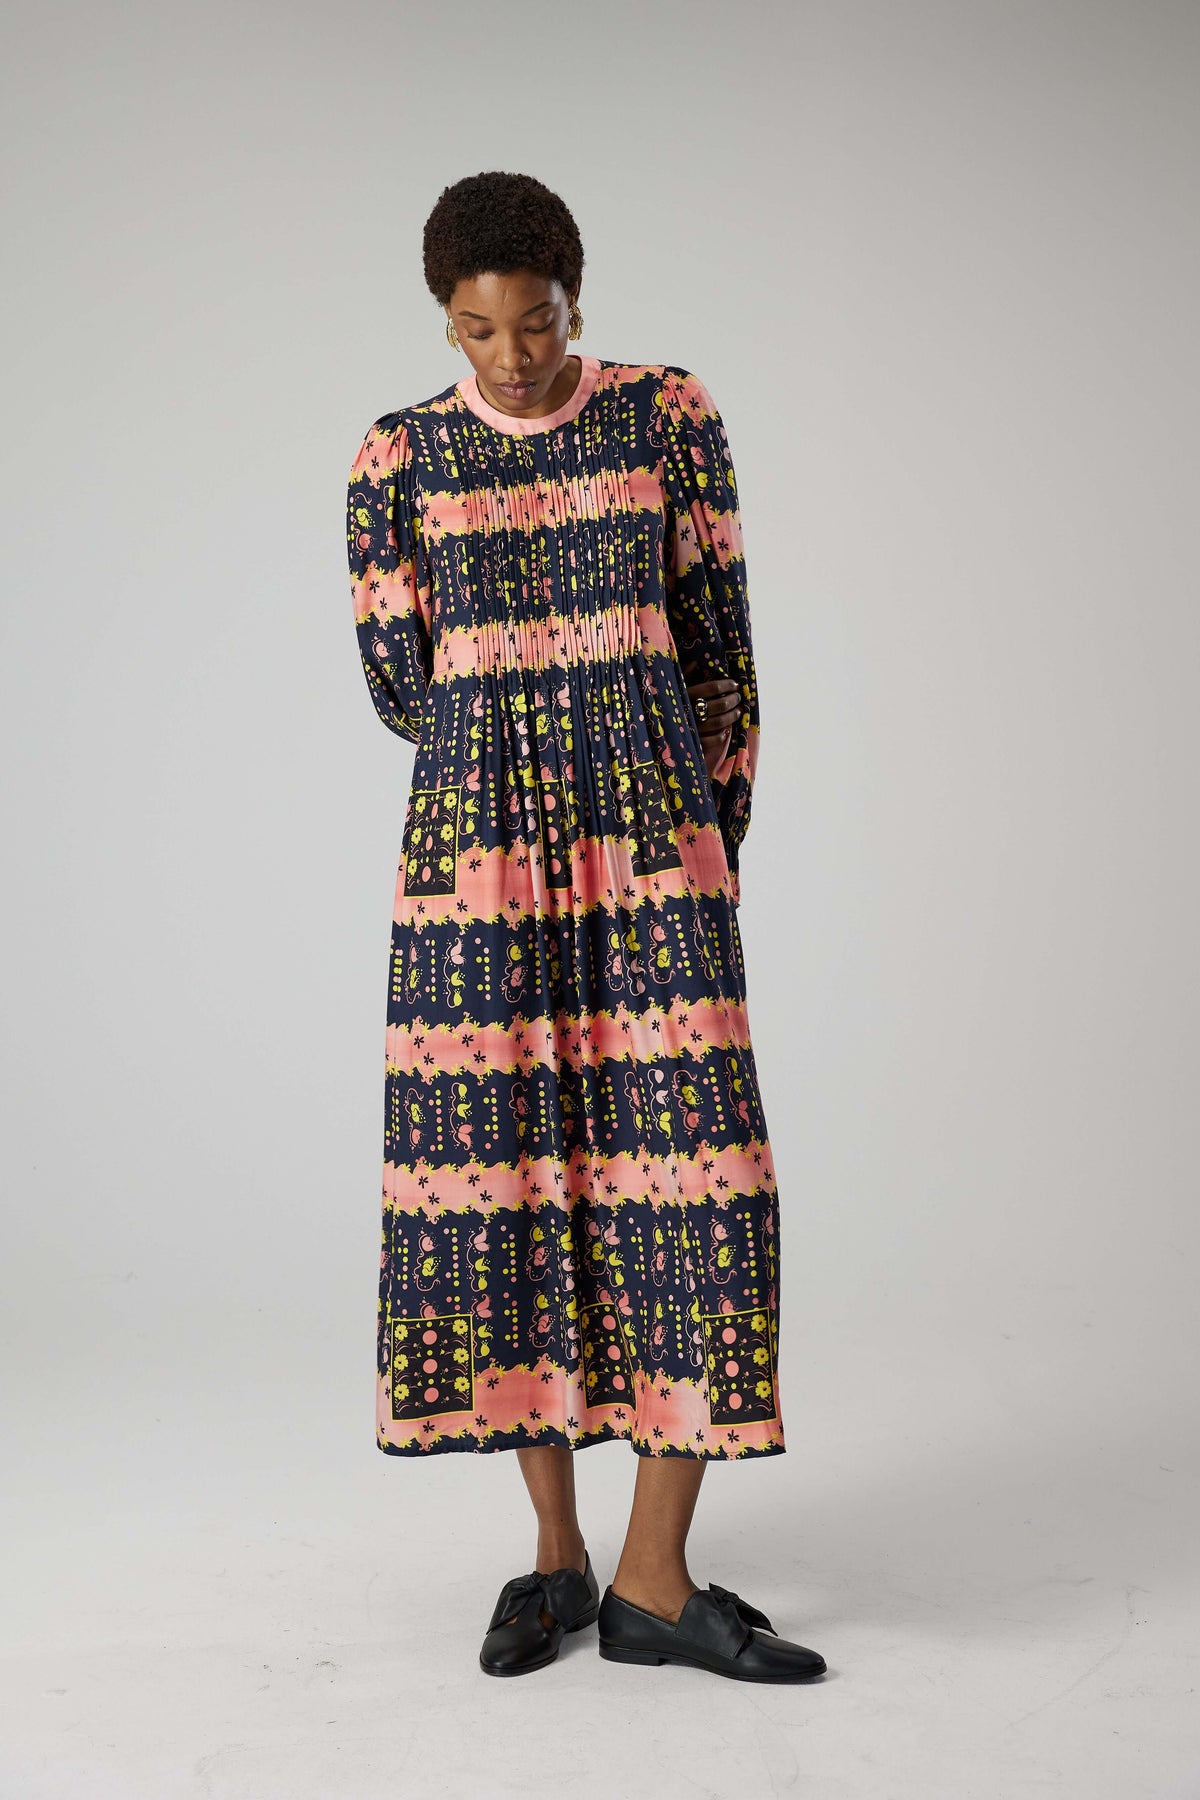 Thelma dress in Esoteric print